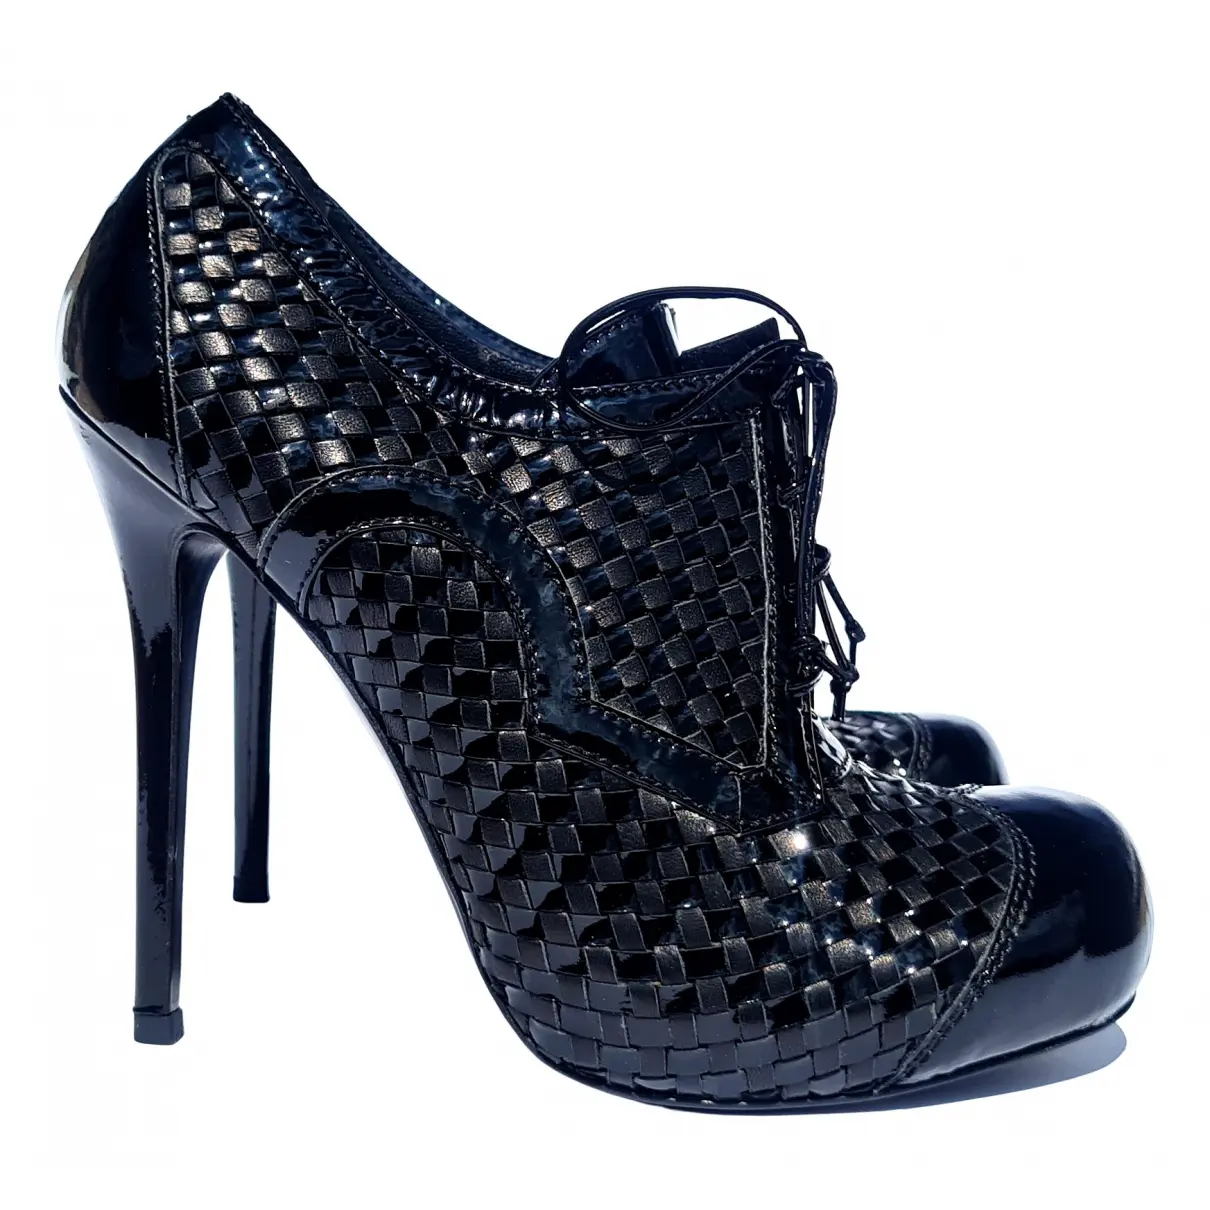 Patent leather lace up boots Alexander McQueen